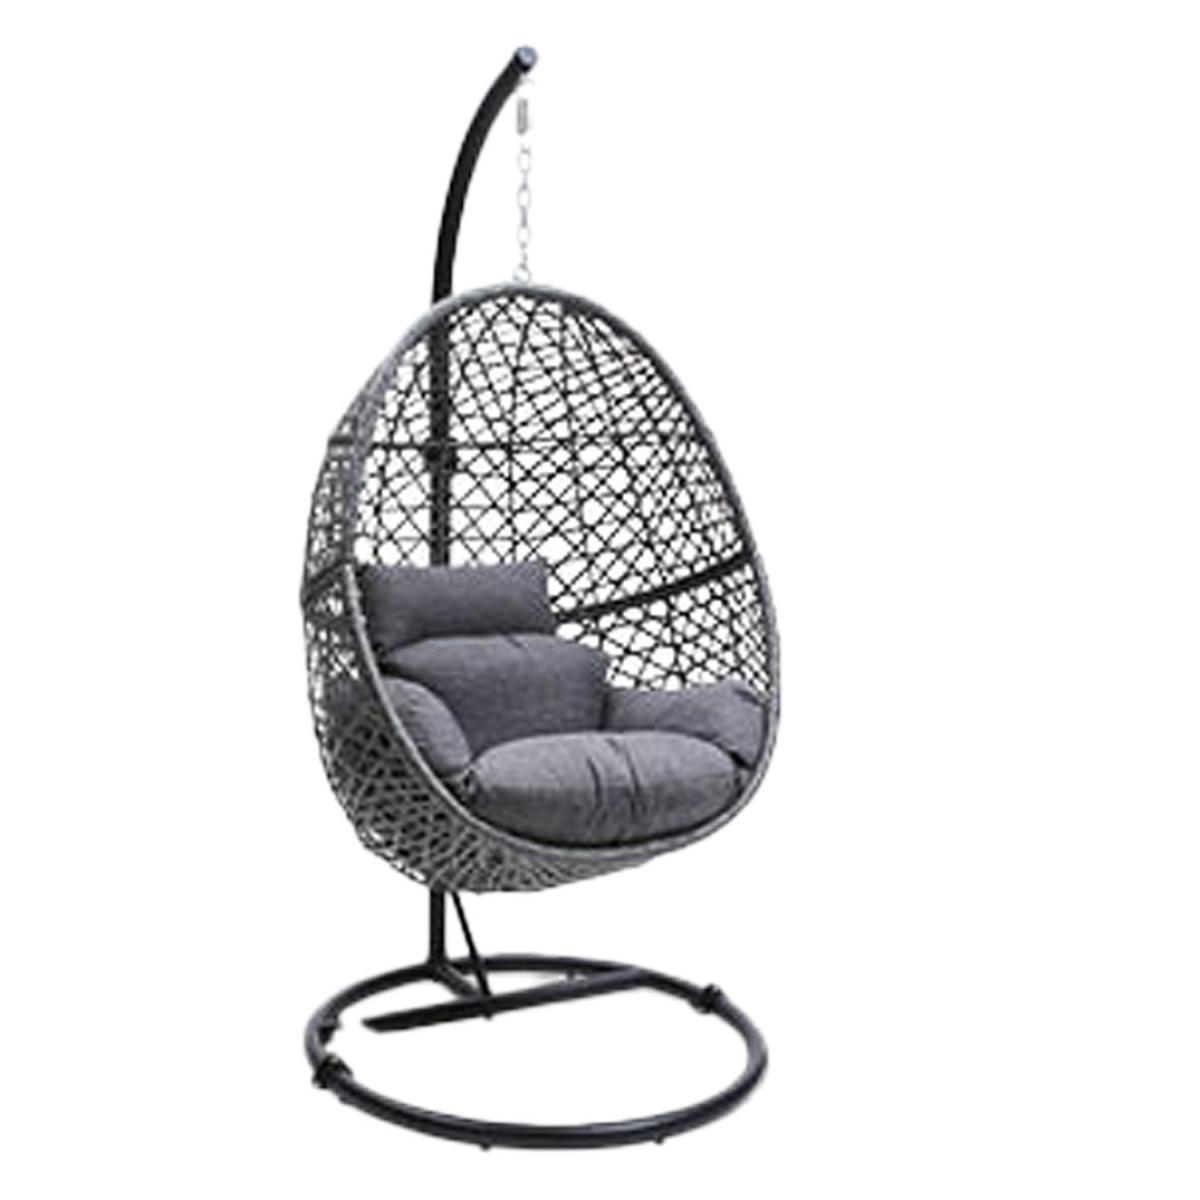 Aldi S Hanging Egg Chair Is Back On Sale Just In Time For Spring And It S Cheap